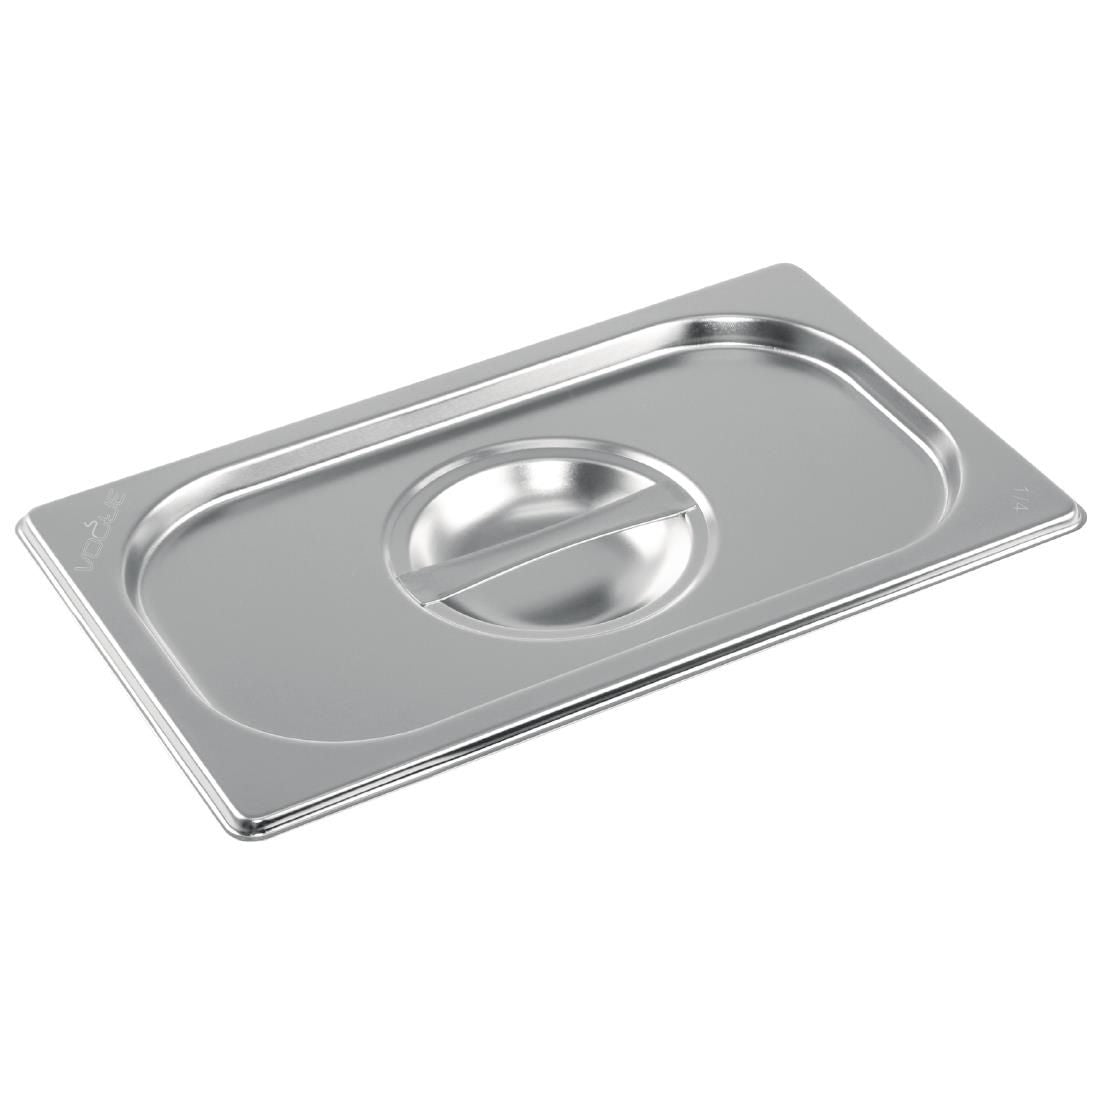 K972 Vogue Stainless Steel 1/4 Gastronorm Lid